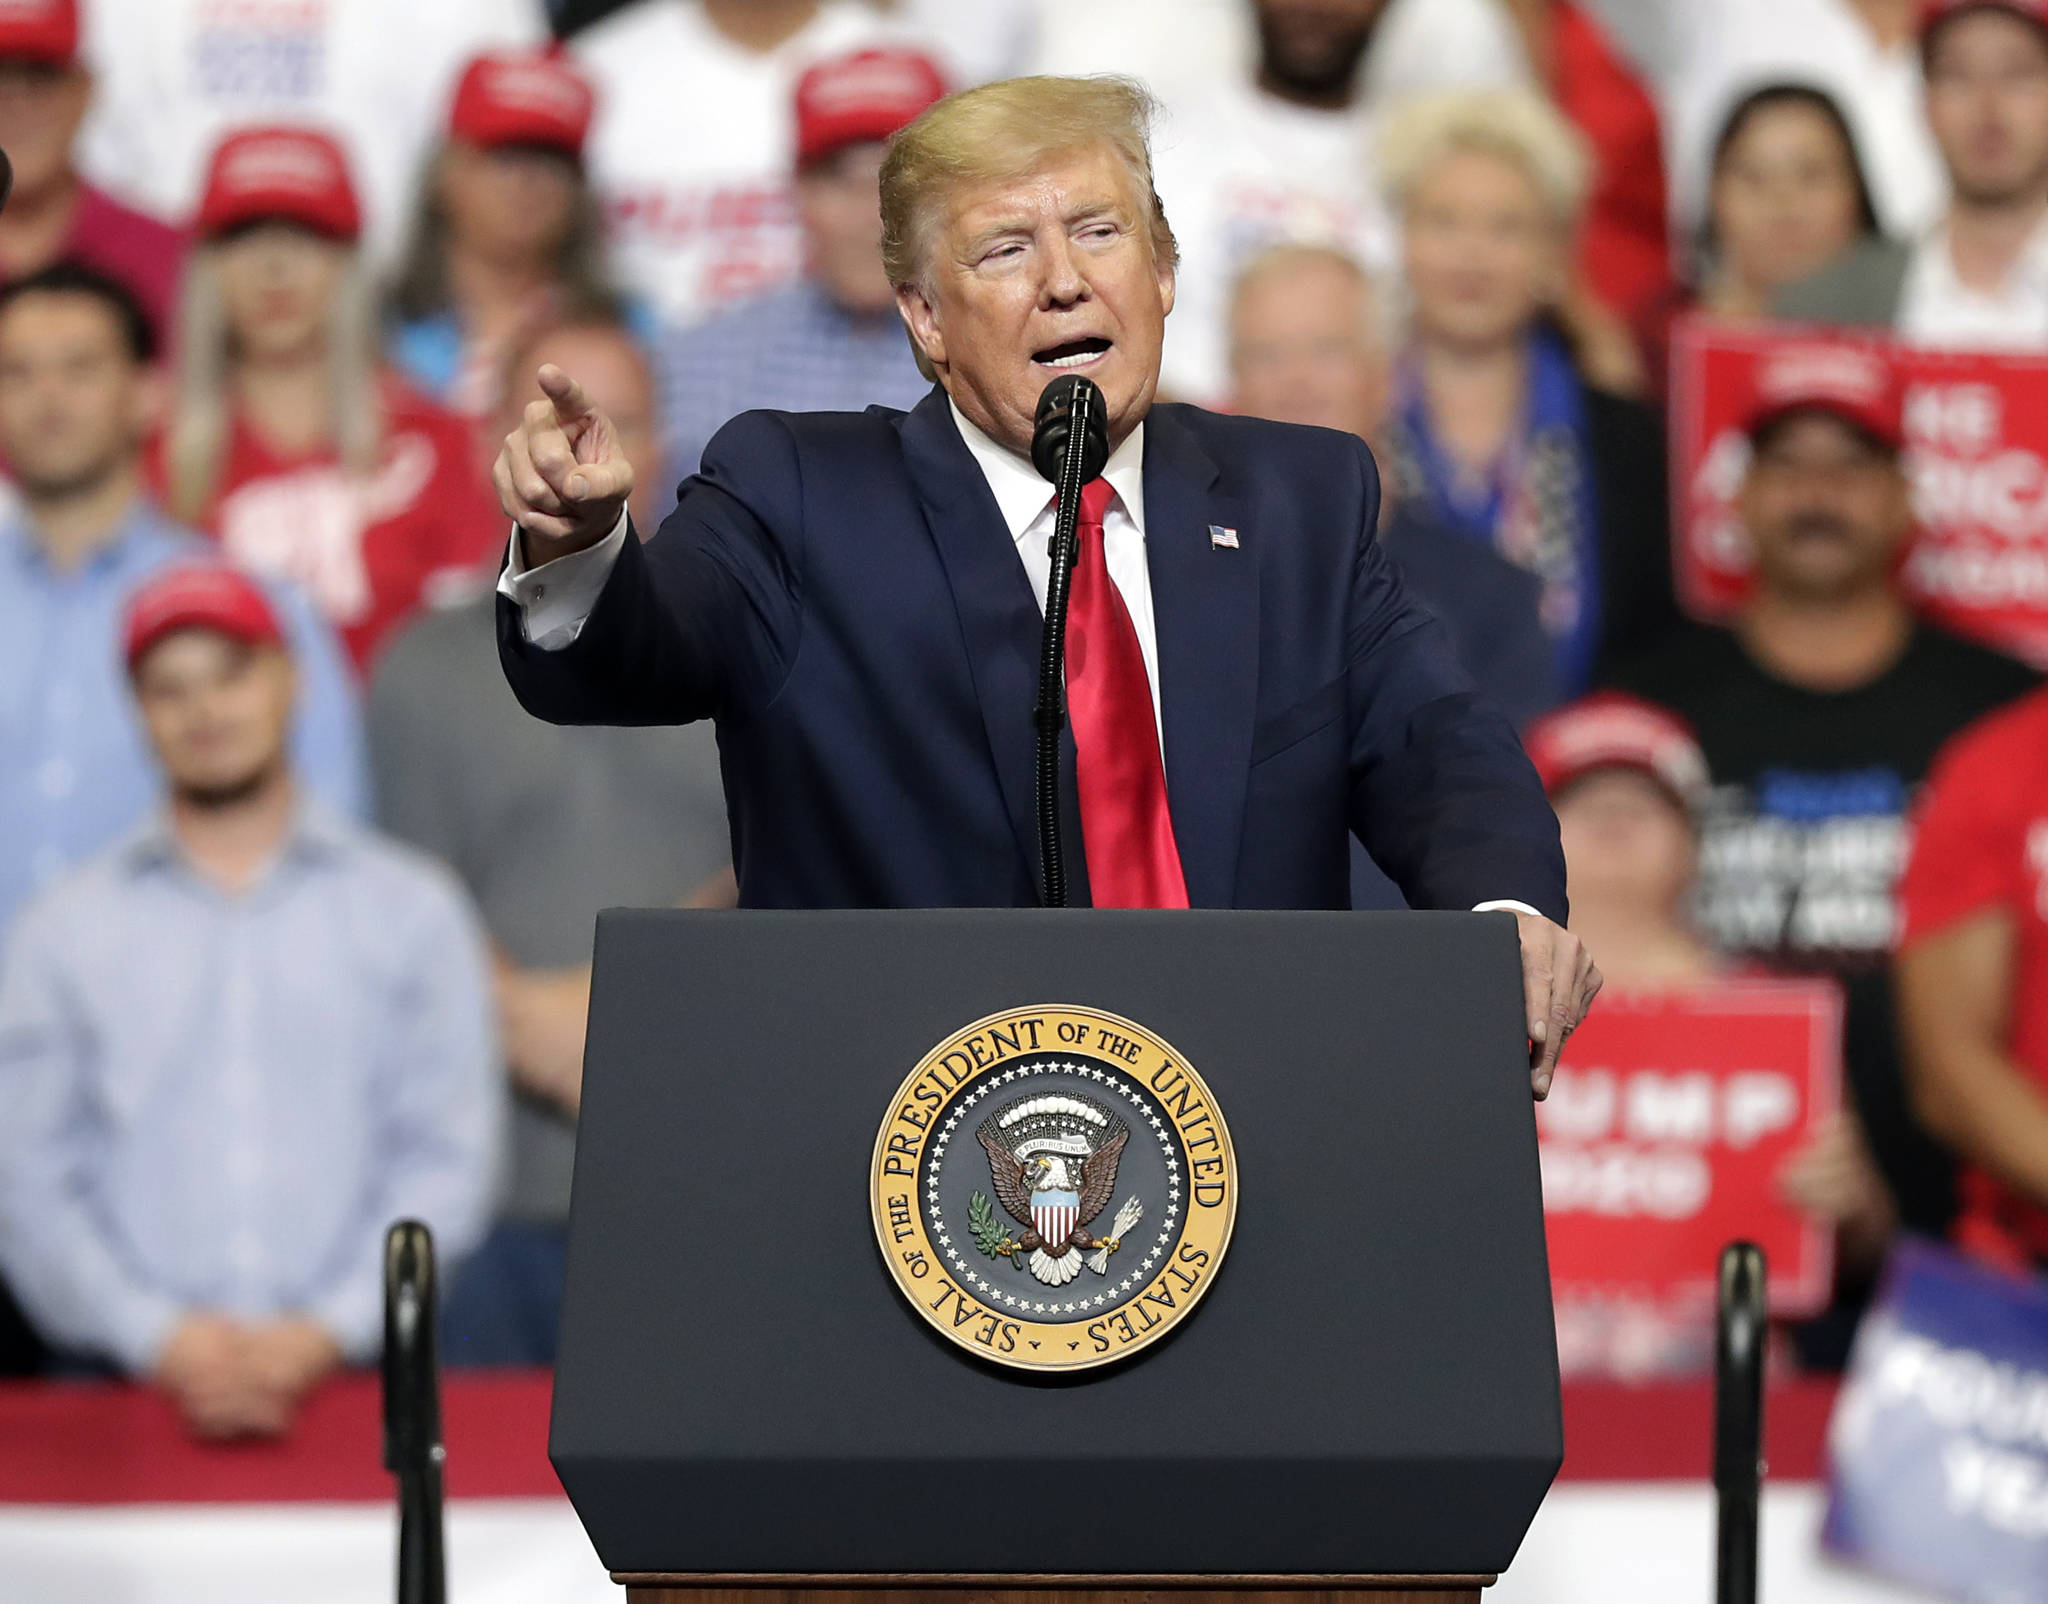 Trump rehashes gripes, rips ‘radical’ Dems in 2020 launch